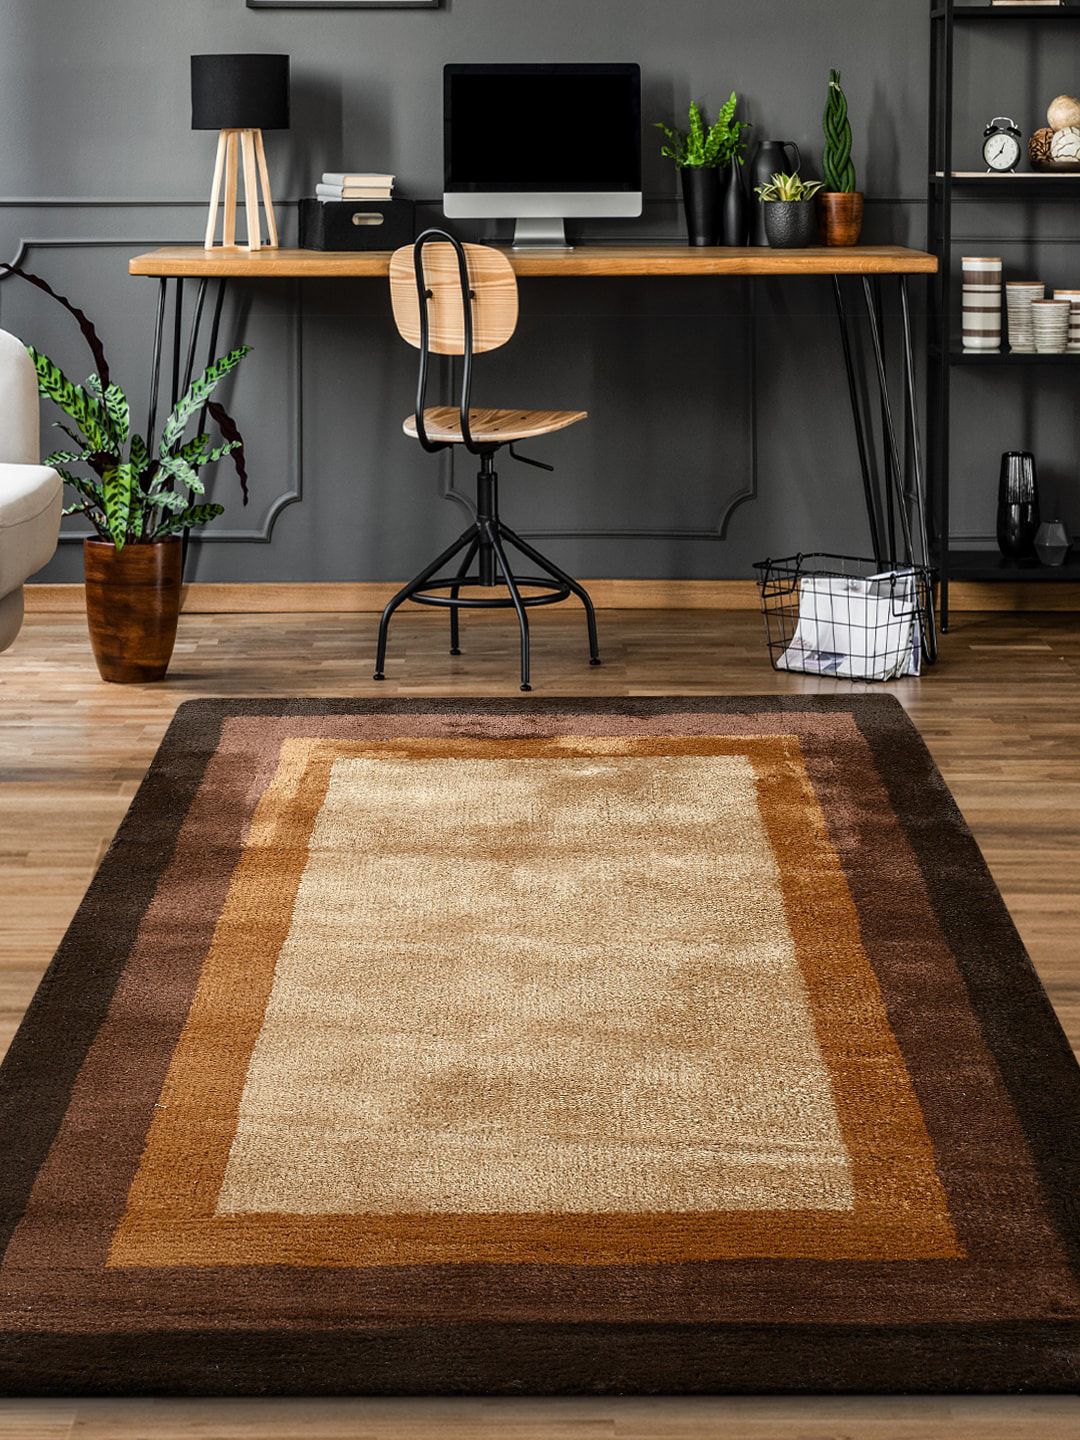 Saral Home Beige & Brown Printed Cotton Carpet Price in India